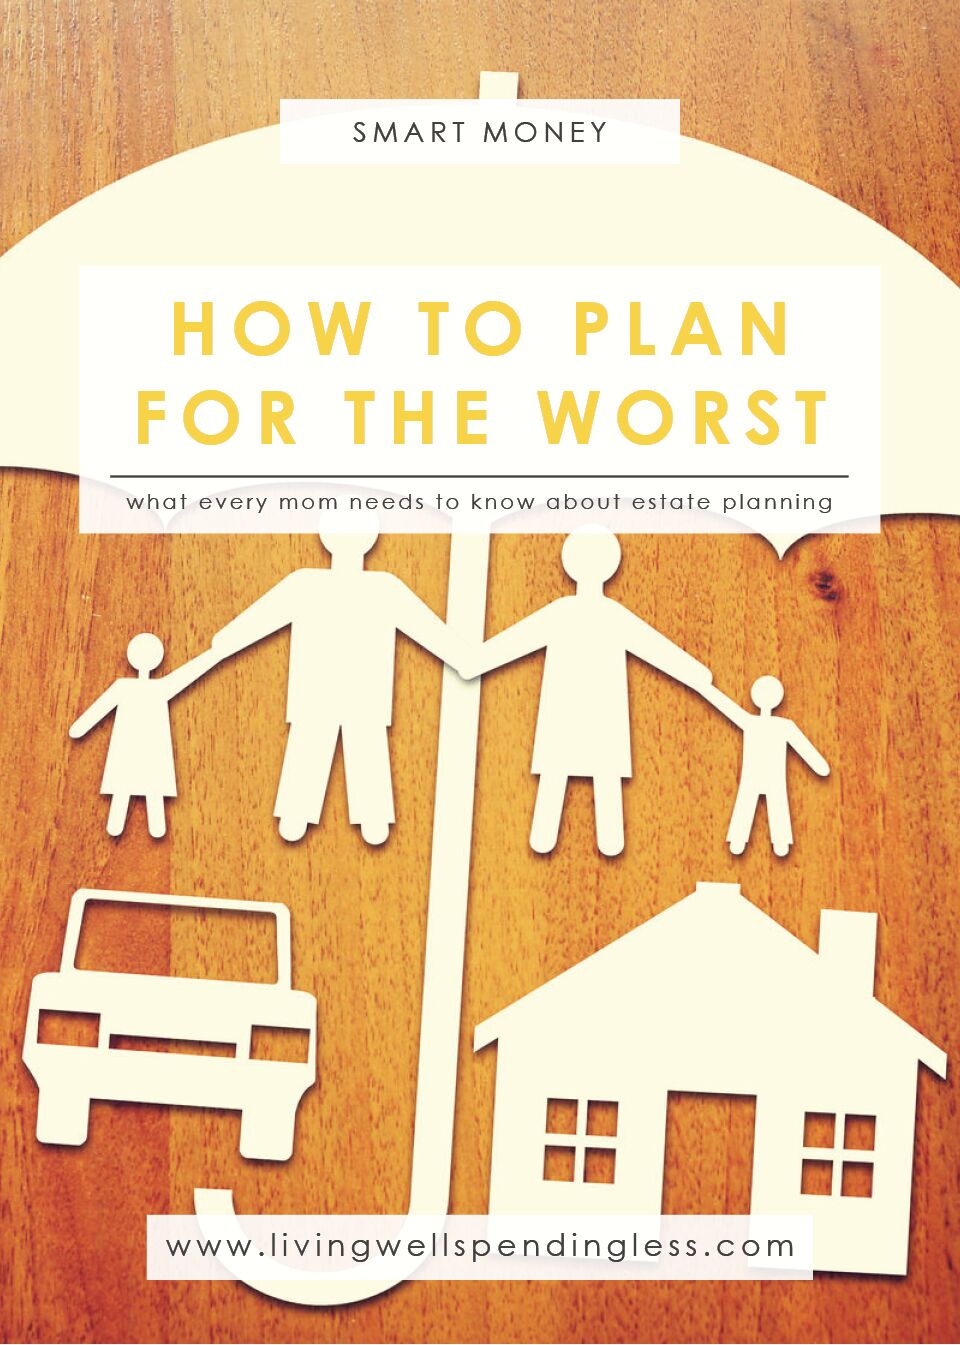 What Every Mom Needs to Know About Estate Planning | Money Saving Tips | Parenting | Saving & Investing | Wills and Estate Planning